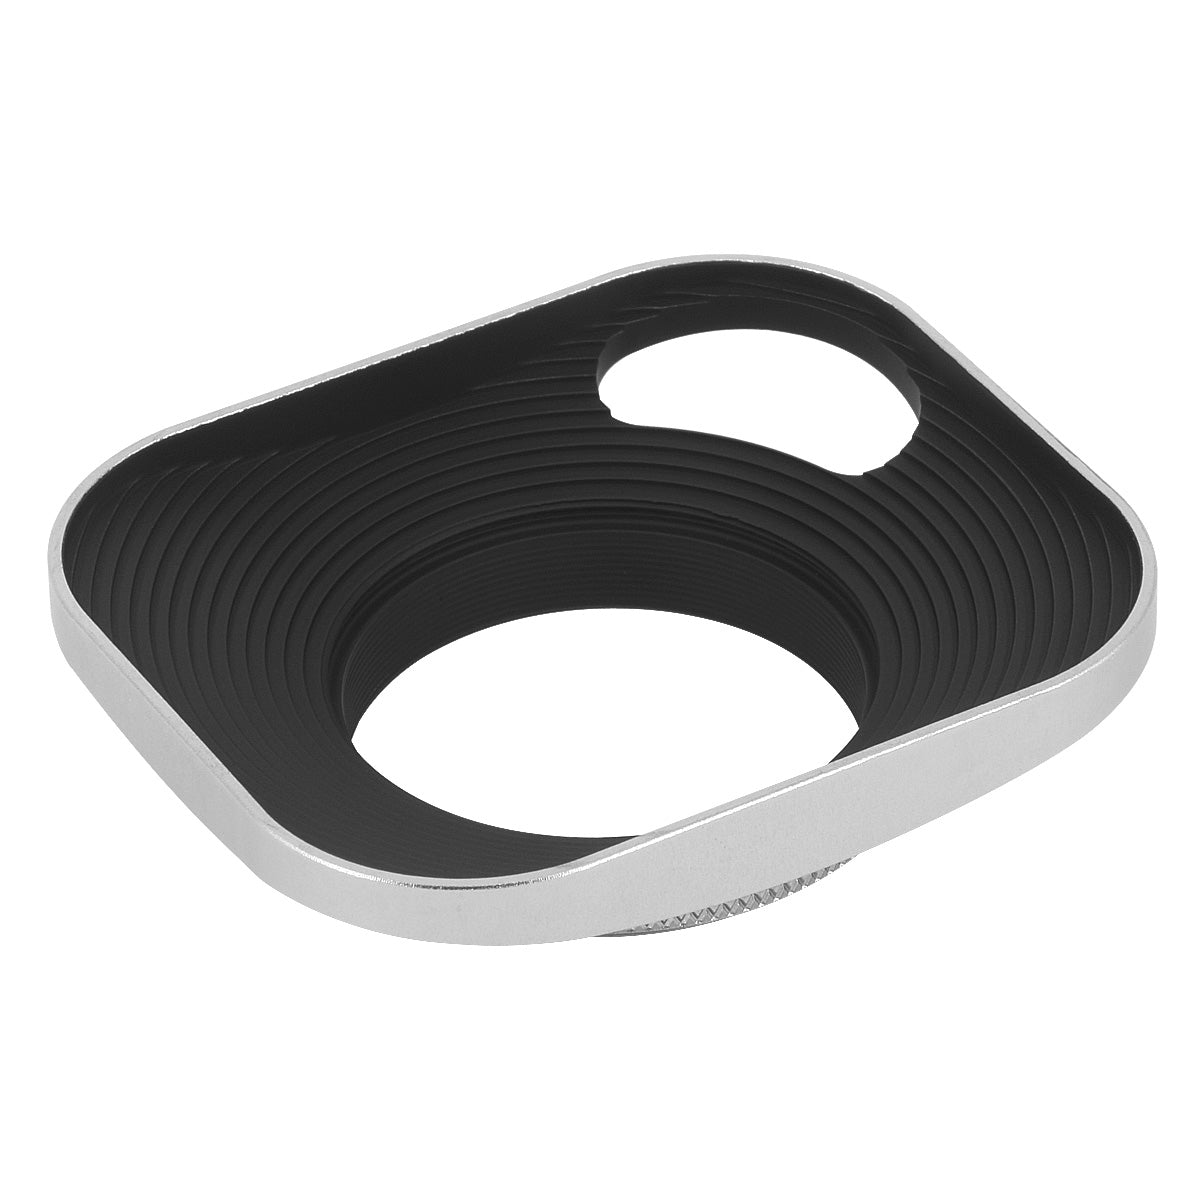 Haoge LH-W39P 39mm Square Metal Screw-in Lens Hood Hollow Out Designed with Cap for Leica Rangefinder Camera with 39mm E39 Filter Thread Lens Silver